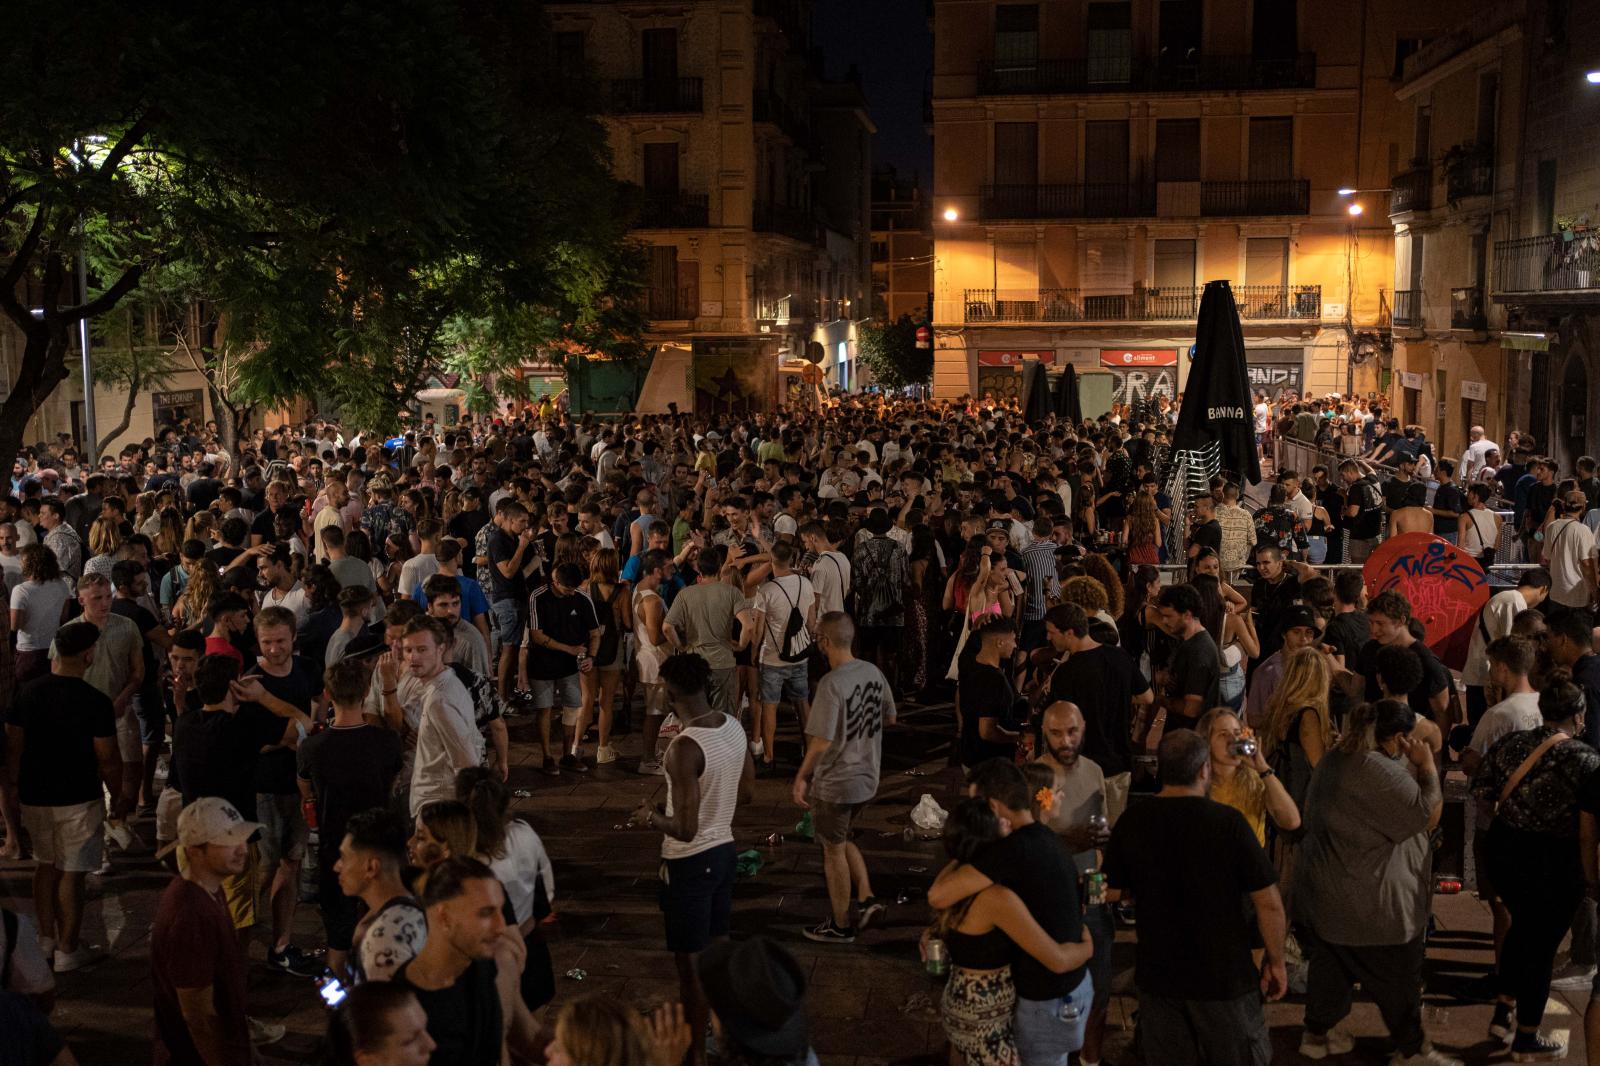 Daily News - A night of crowds and drinking reunions in Barcelona...